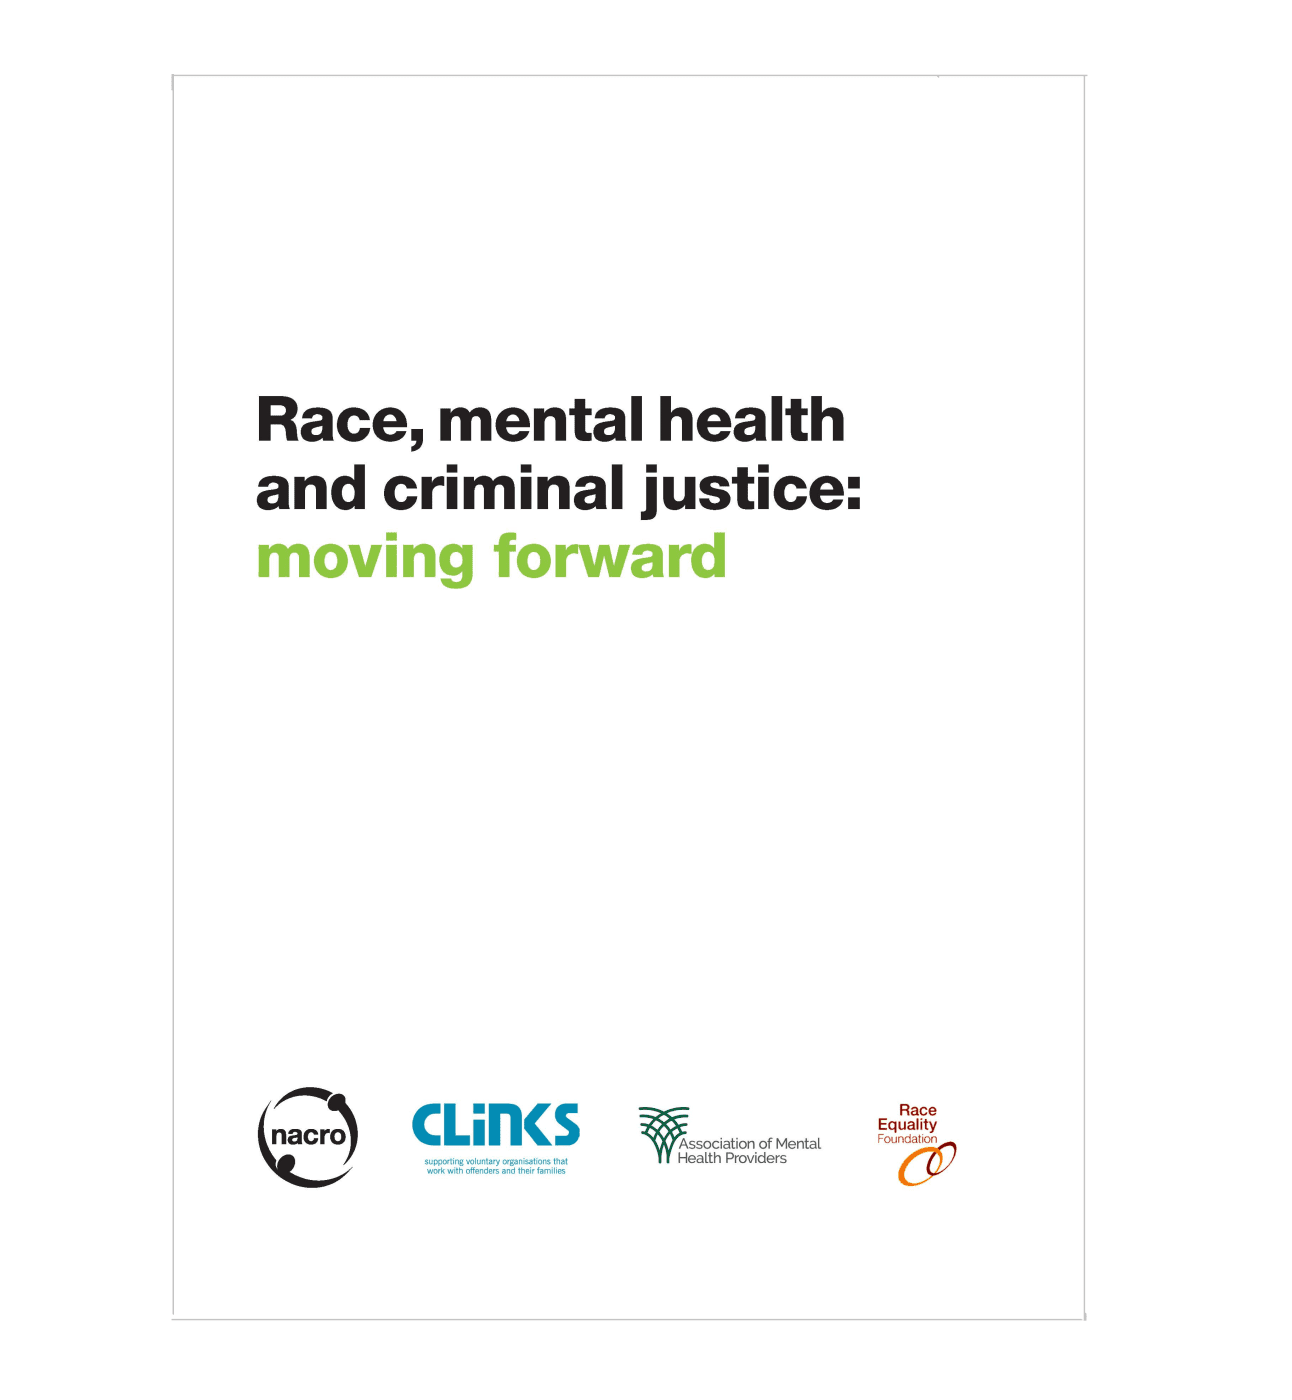 Race,-mental health and criminal justice cover image